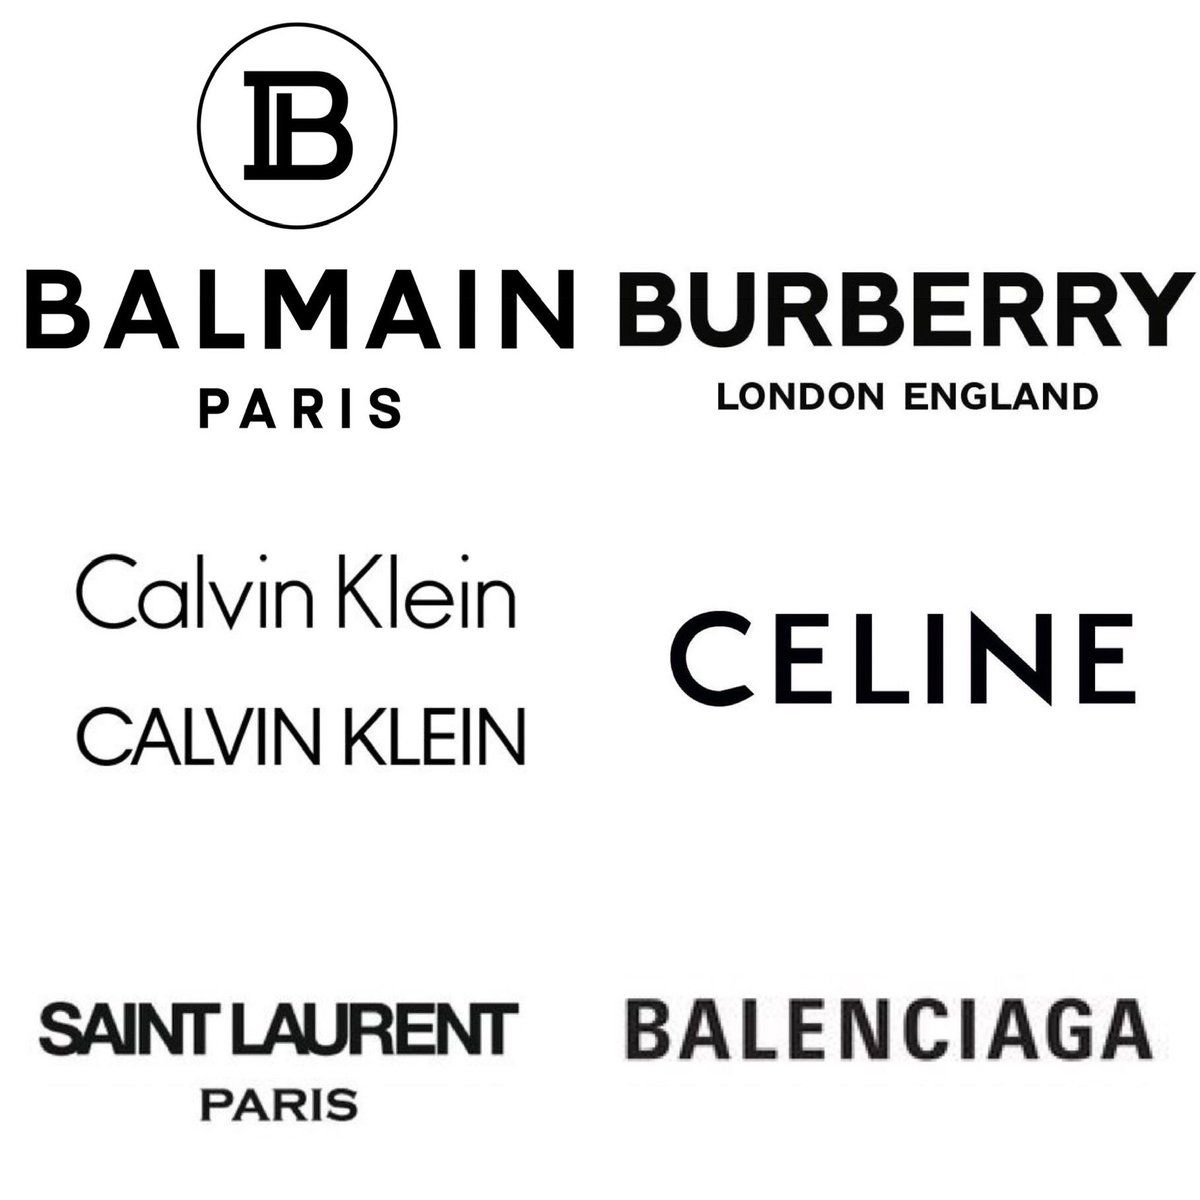 Luxury brands new logos: Mistake or 